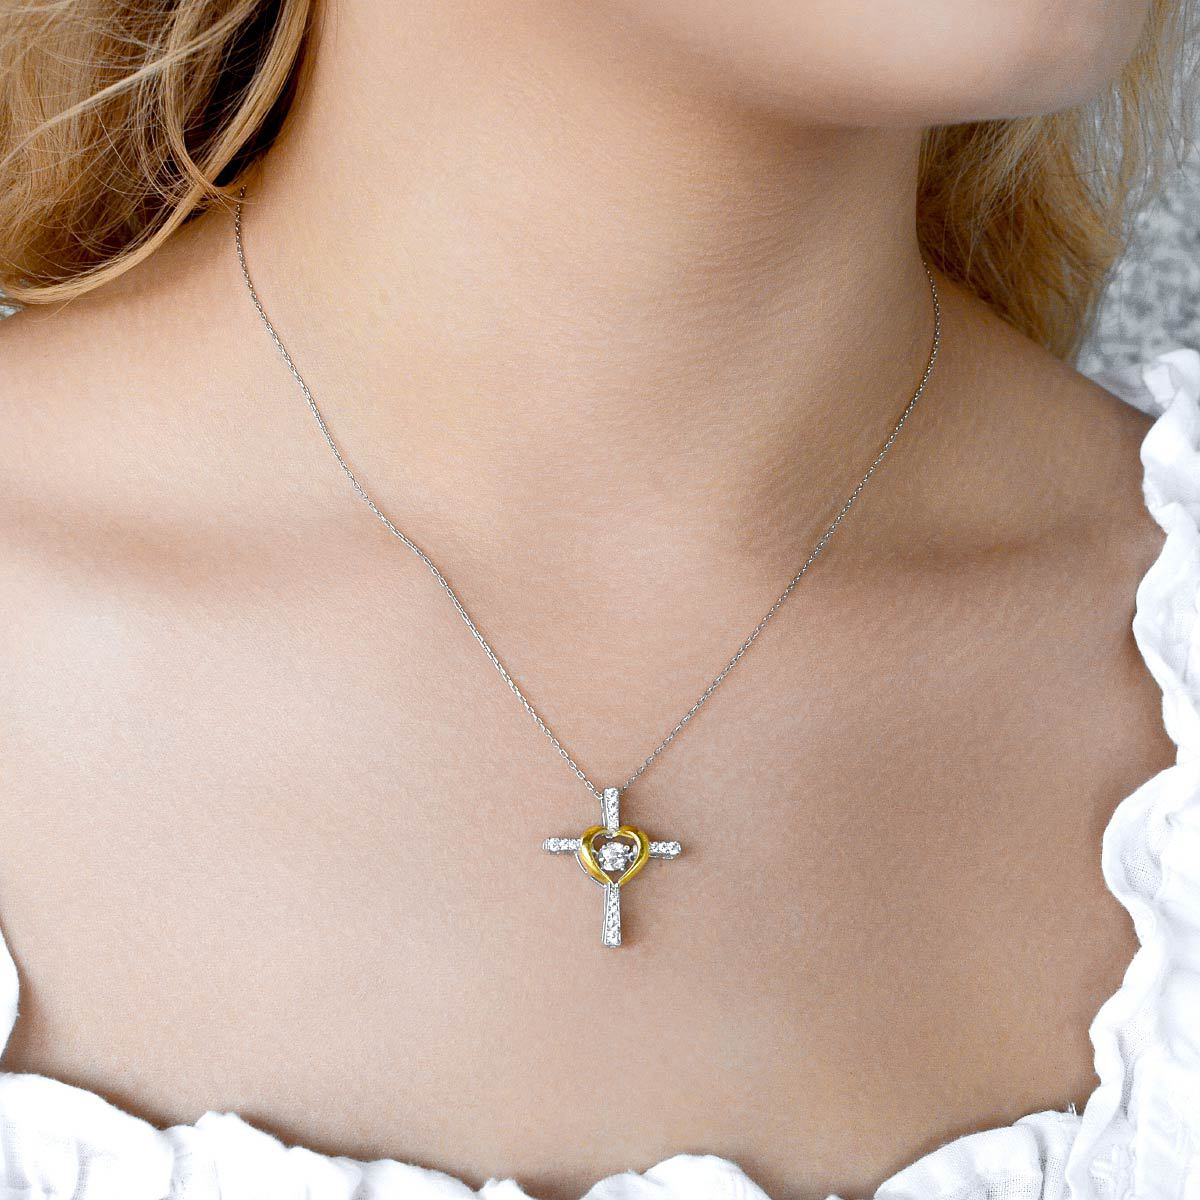 To My Soulmate - Dancing Crystal Heart Cross Necklace Gift Set